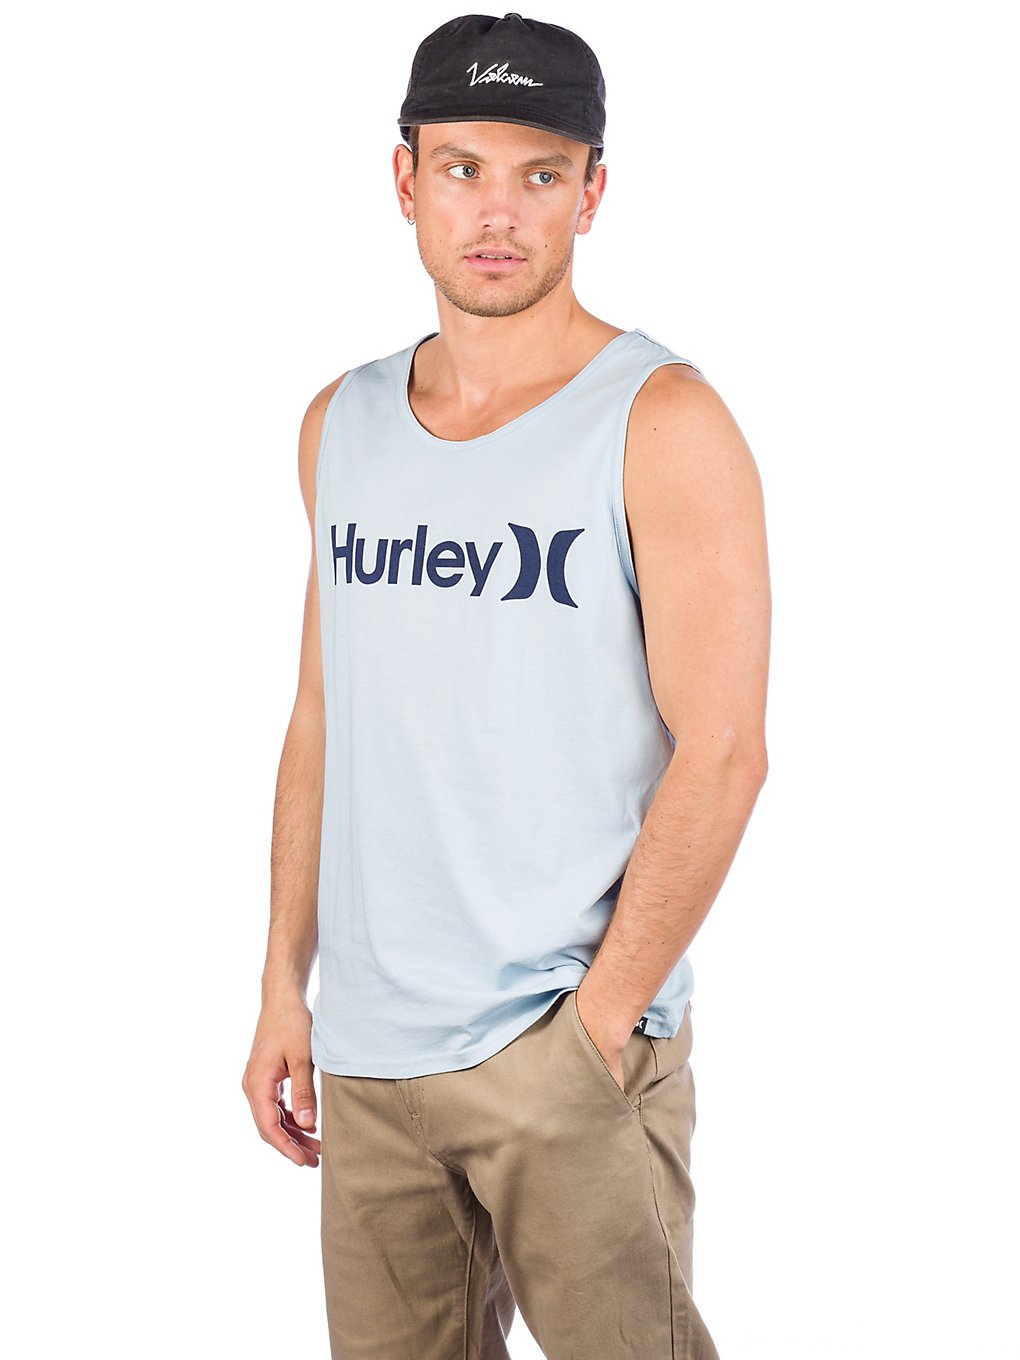 Hurley One & Only Tank Top bleu